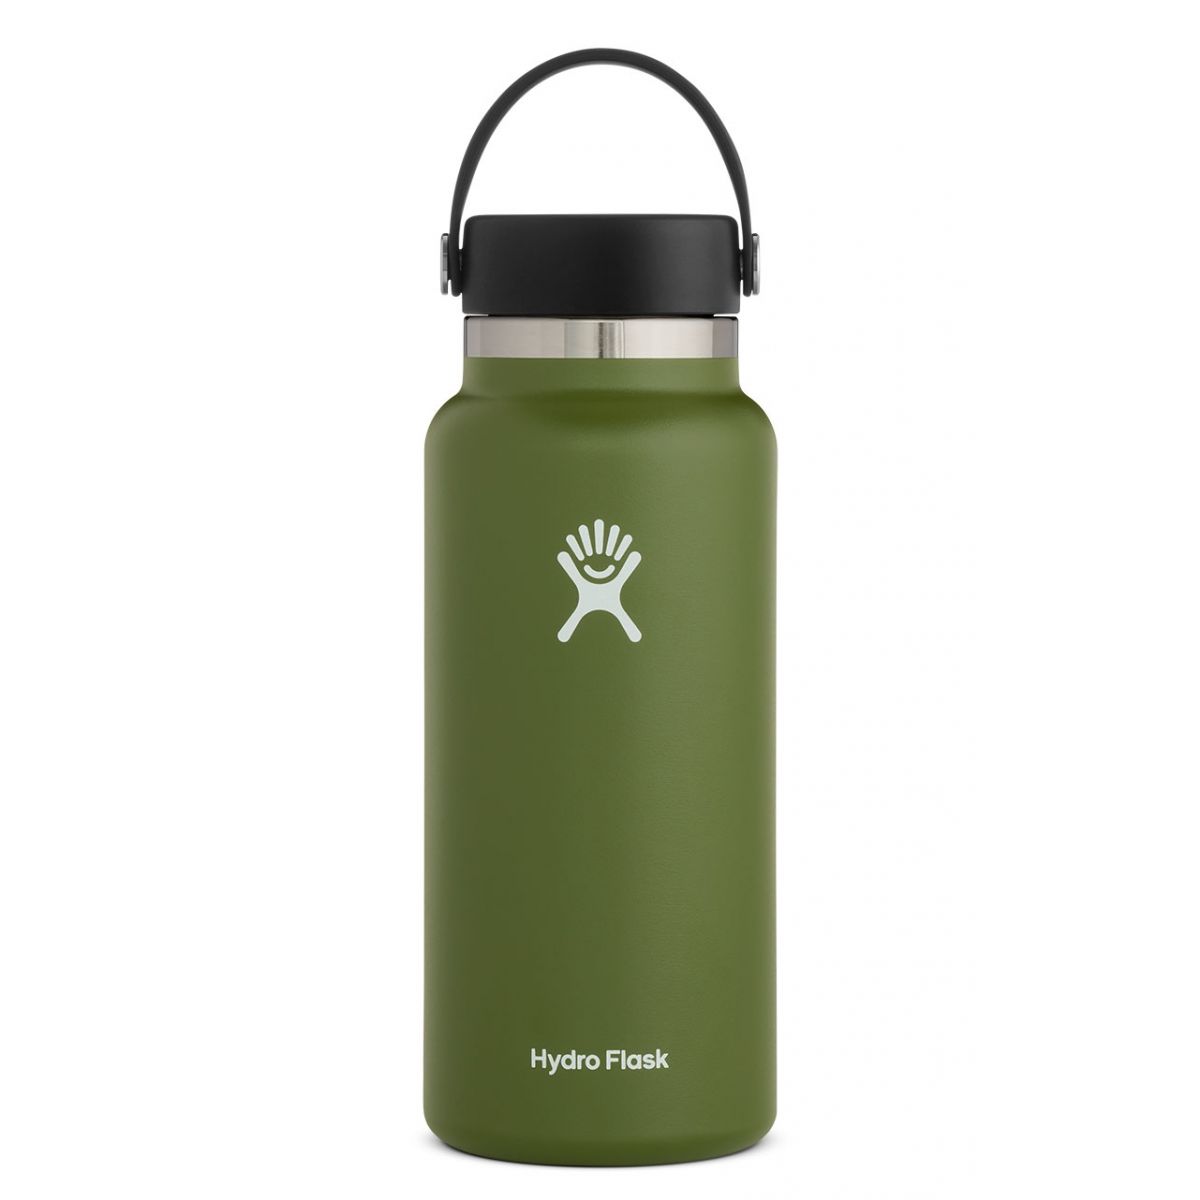 hydroflask 32 oz wide mouth bottle in olive